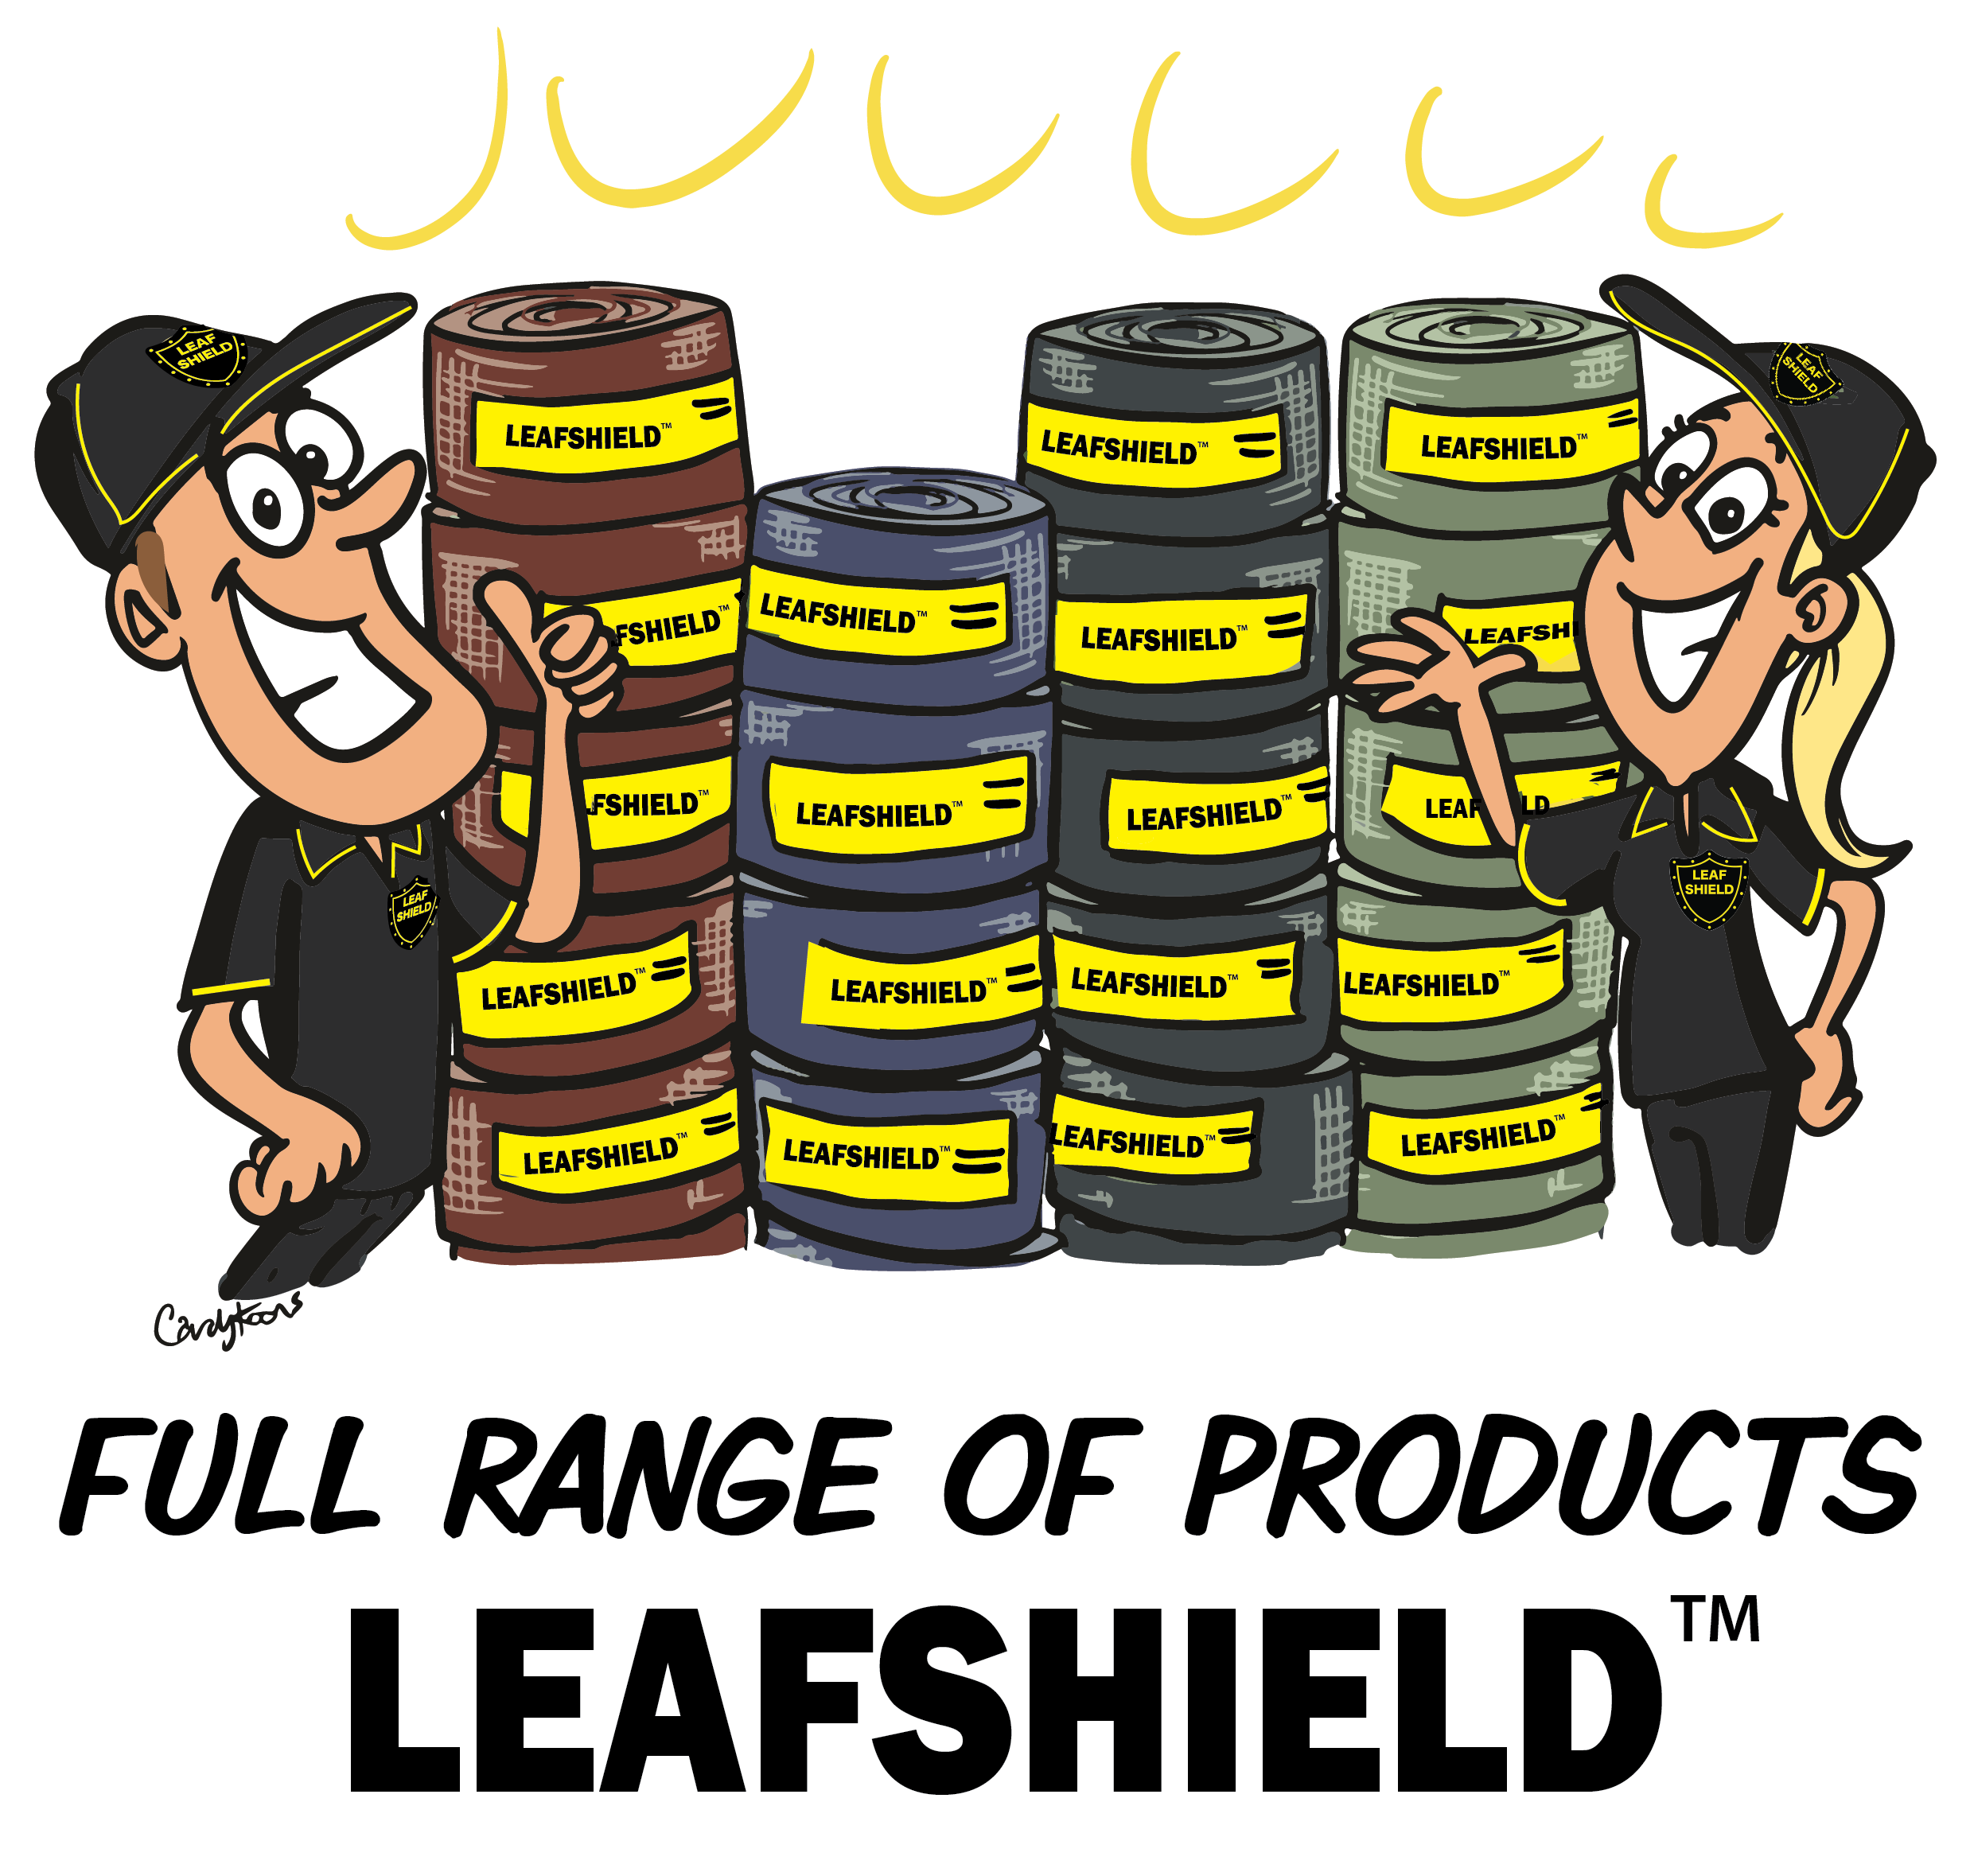 Leafshield™ offers a full range of gutter protection products